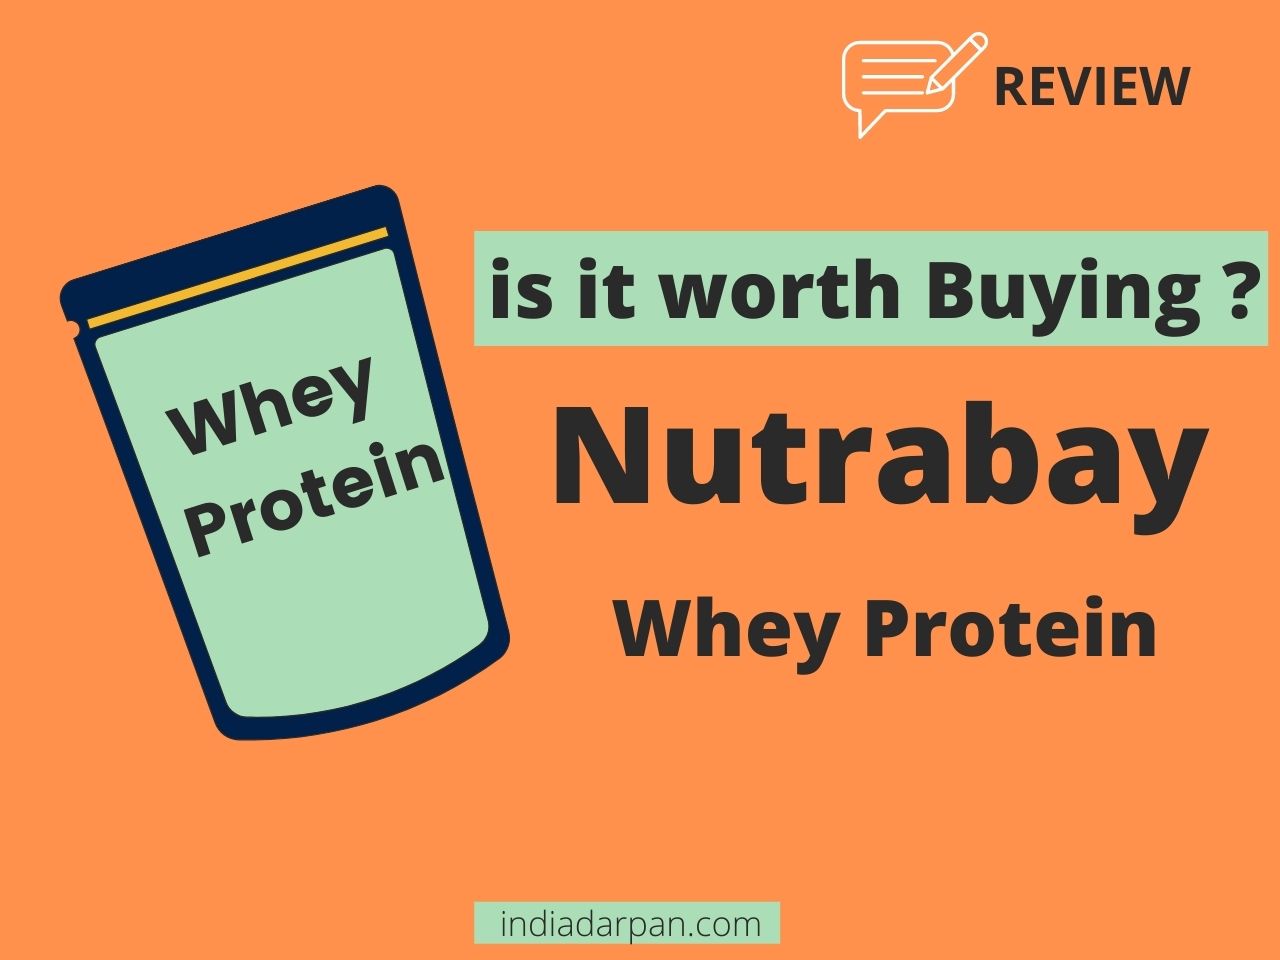 Nutrabay Whey Protein review